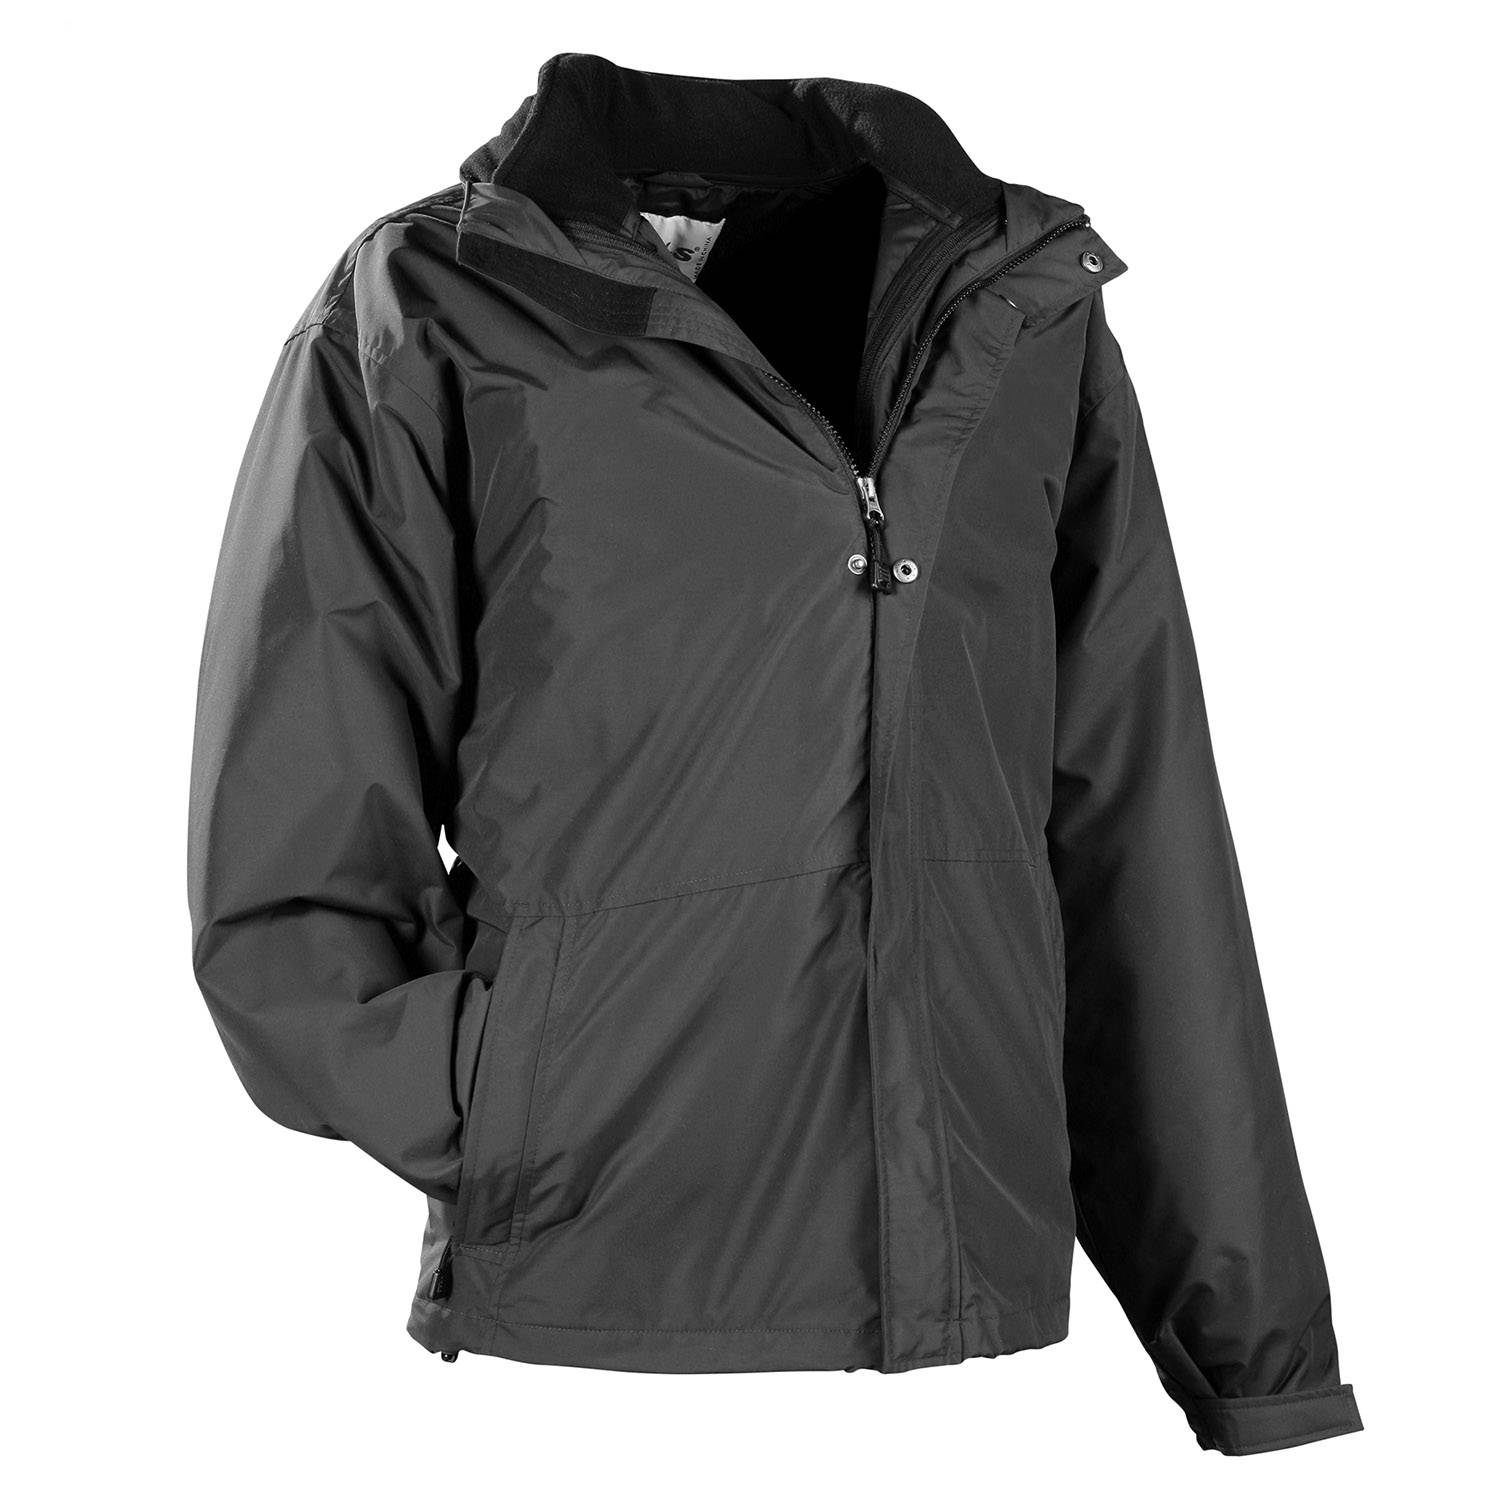 reebok 3 in 1 system jacket review